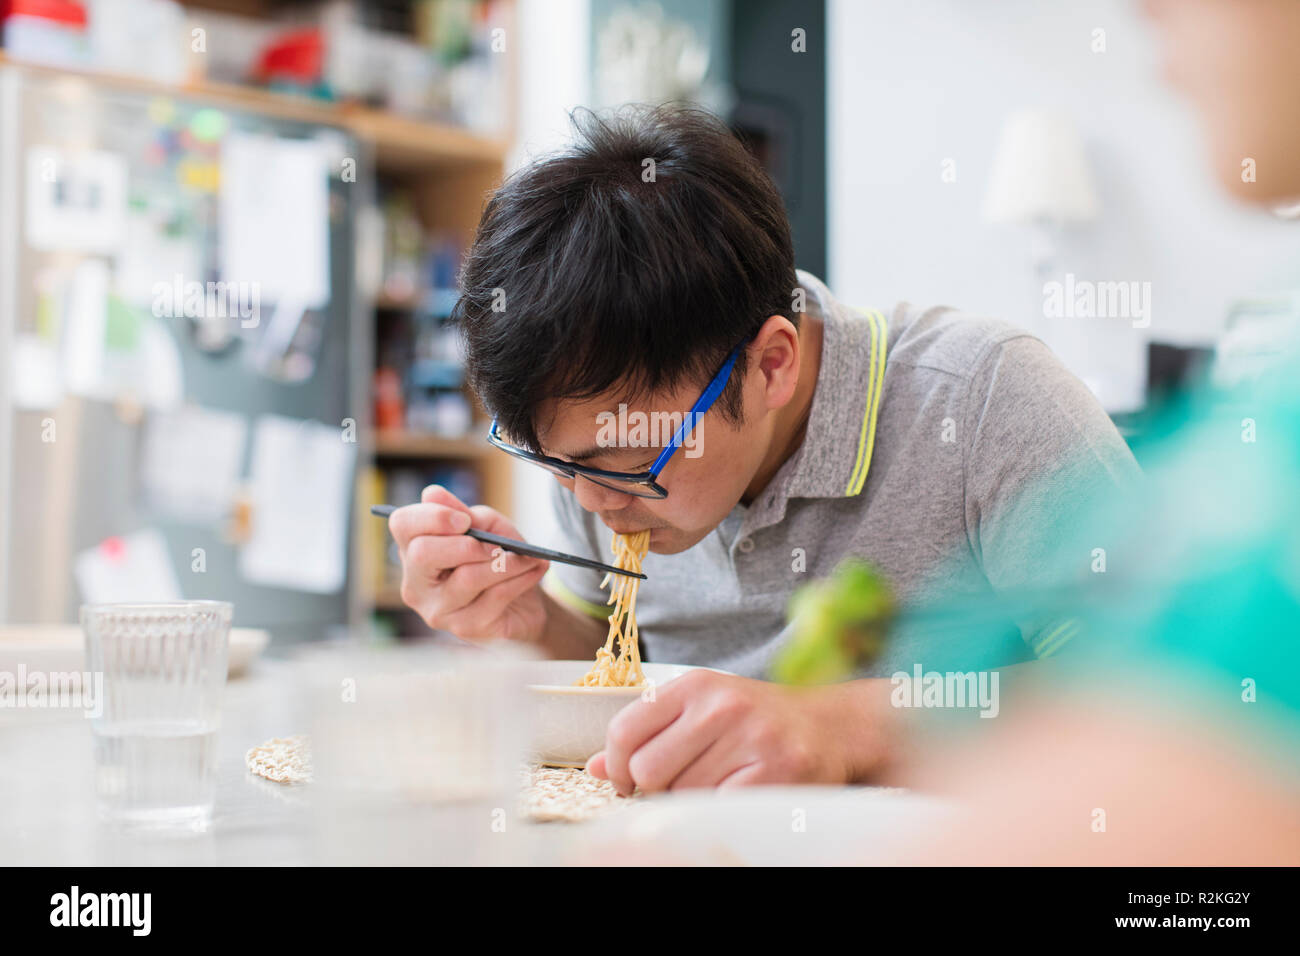 Man eating noodles with chopsticks at table Stock Photo